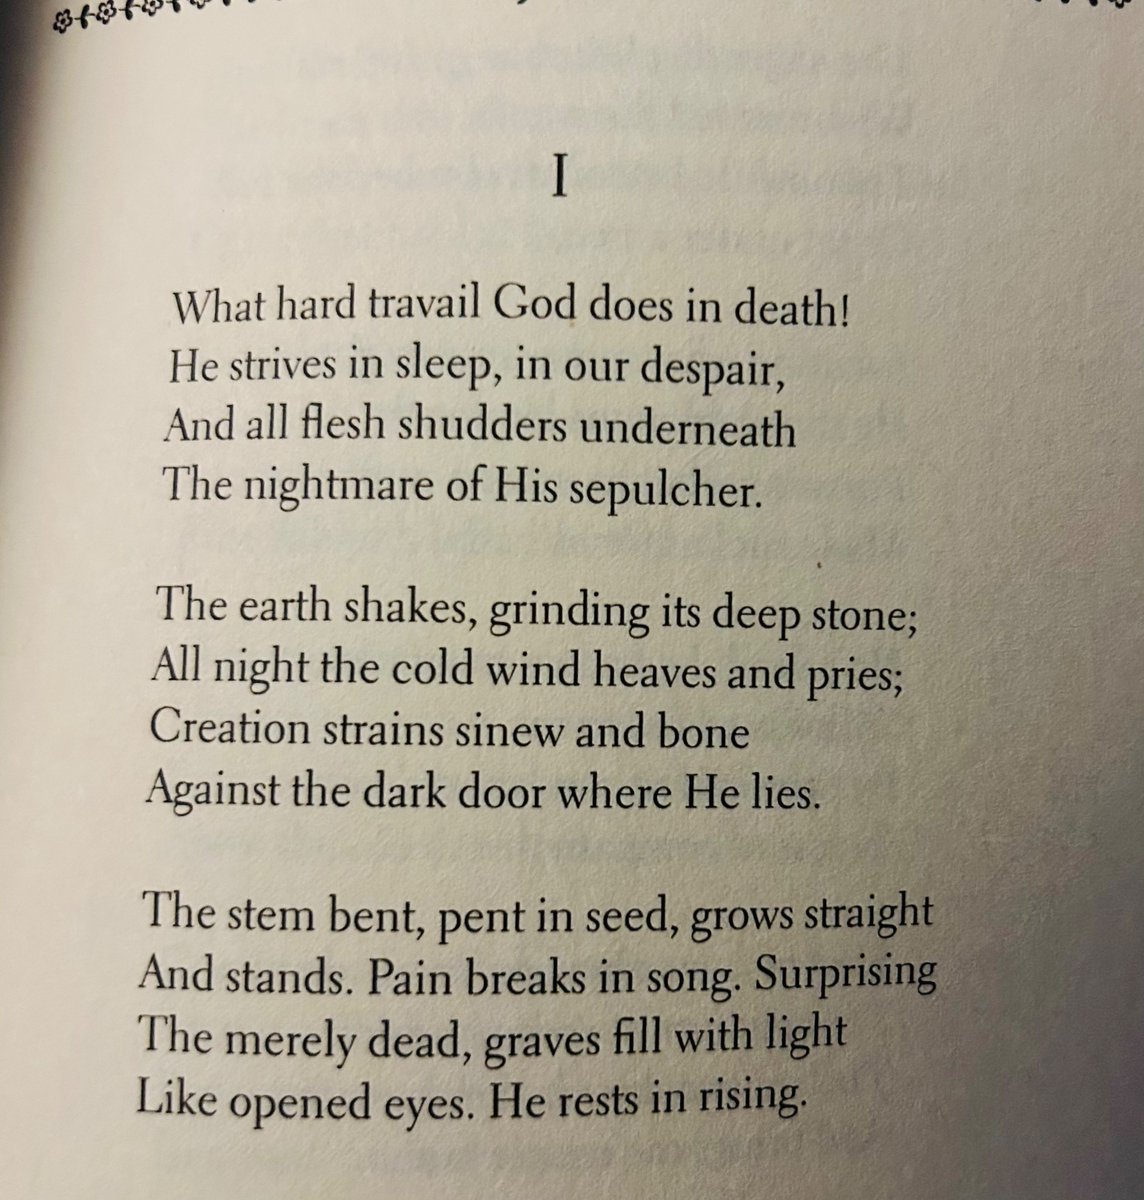 An Easter Sabbath Poem
by #WendellBerry